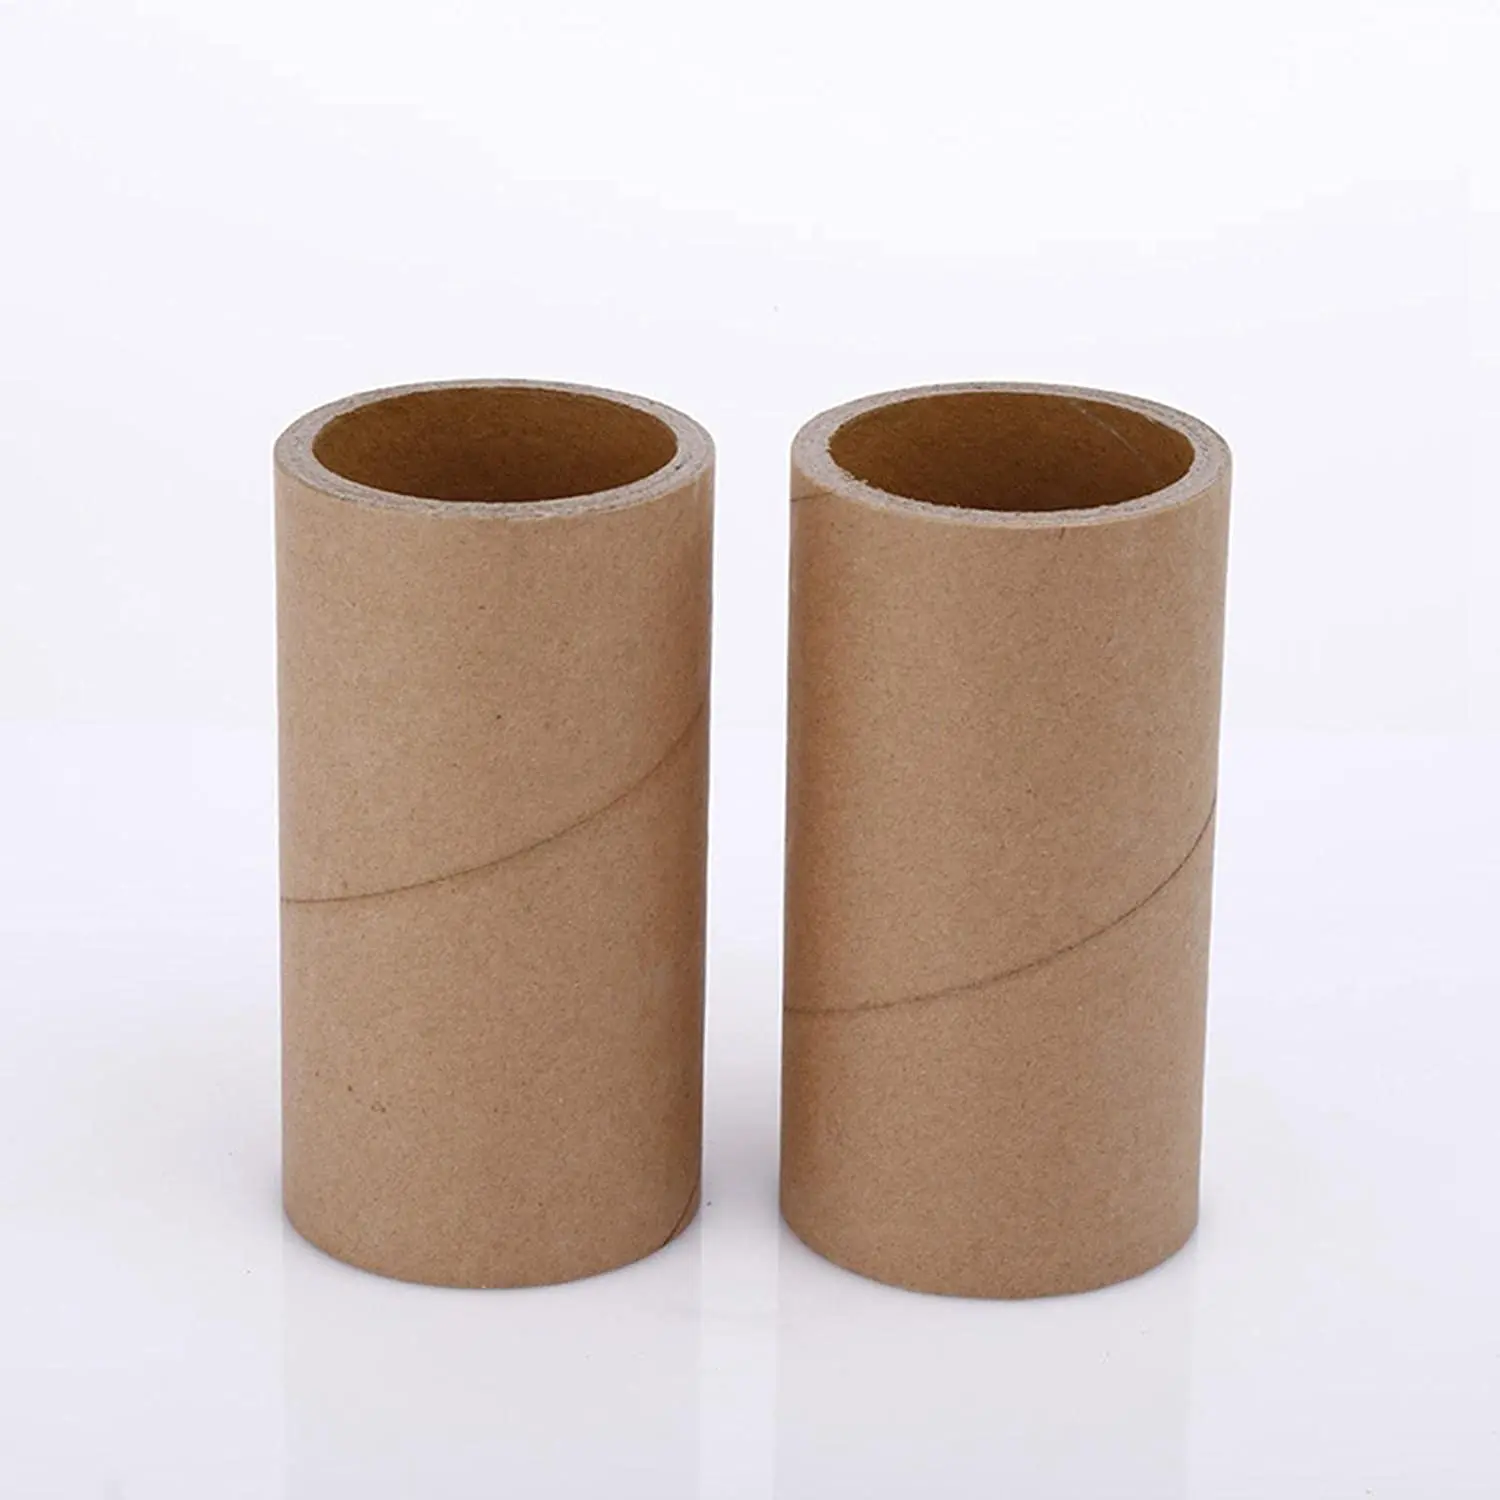 Poster Tubes for Mailing Large Cardboard Round Long Cardboard Protector  Tube Mailing Tube for Blueprints Poster Art Prints Artwo - AliExpress